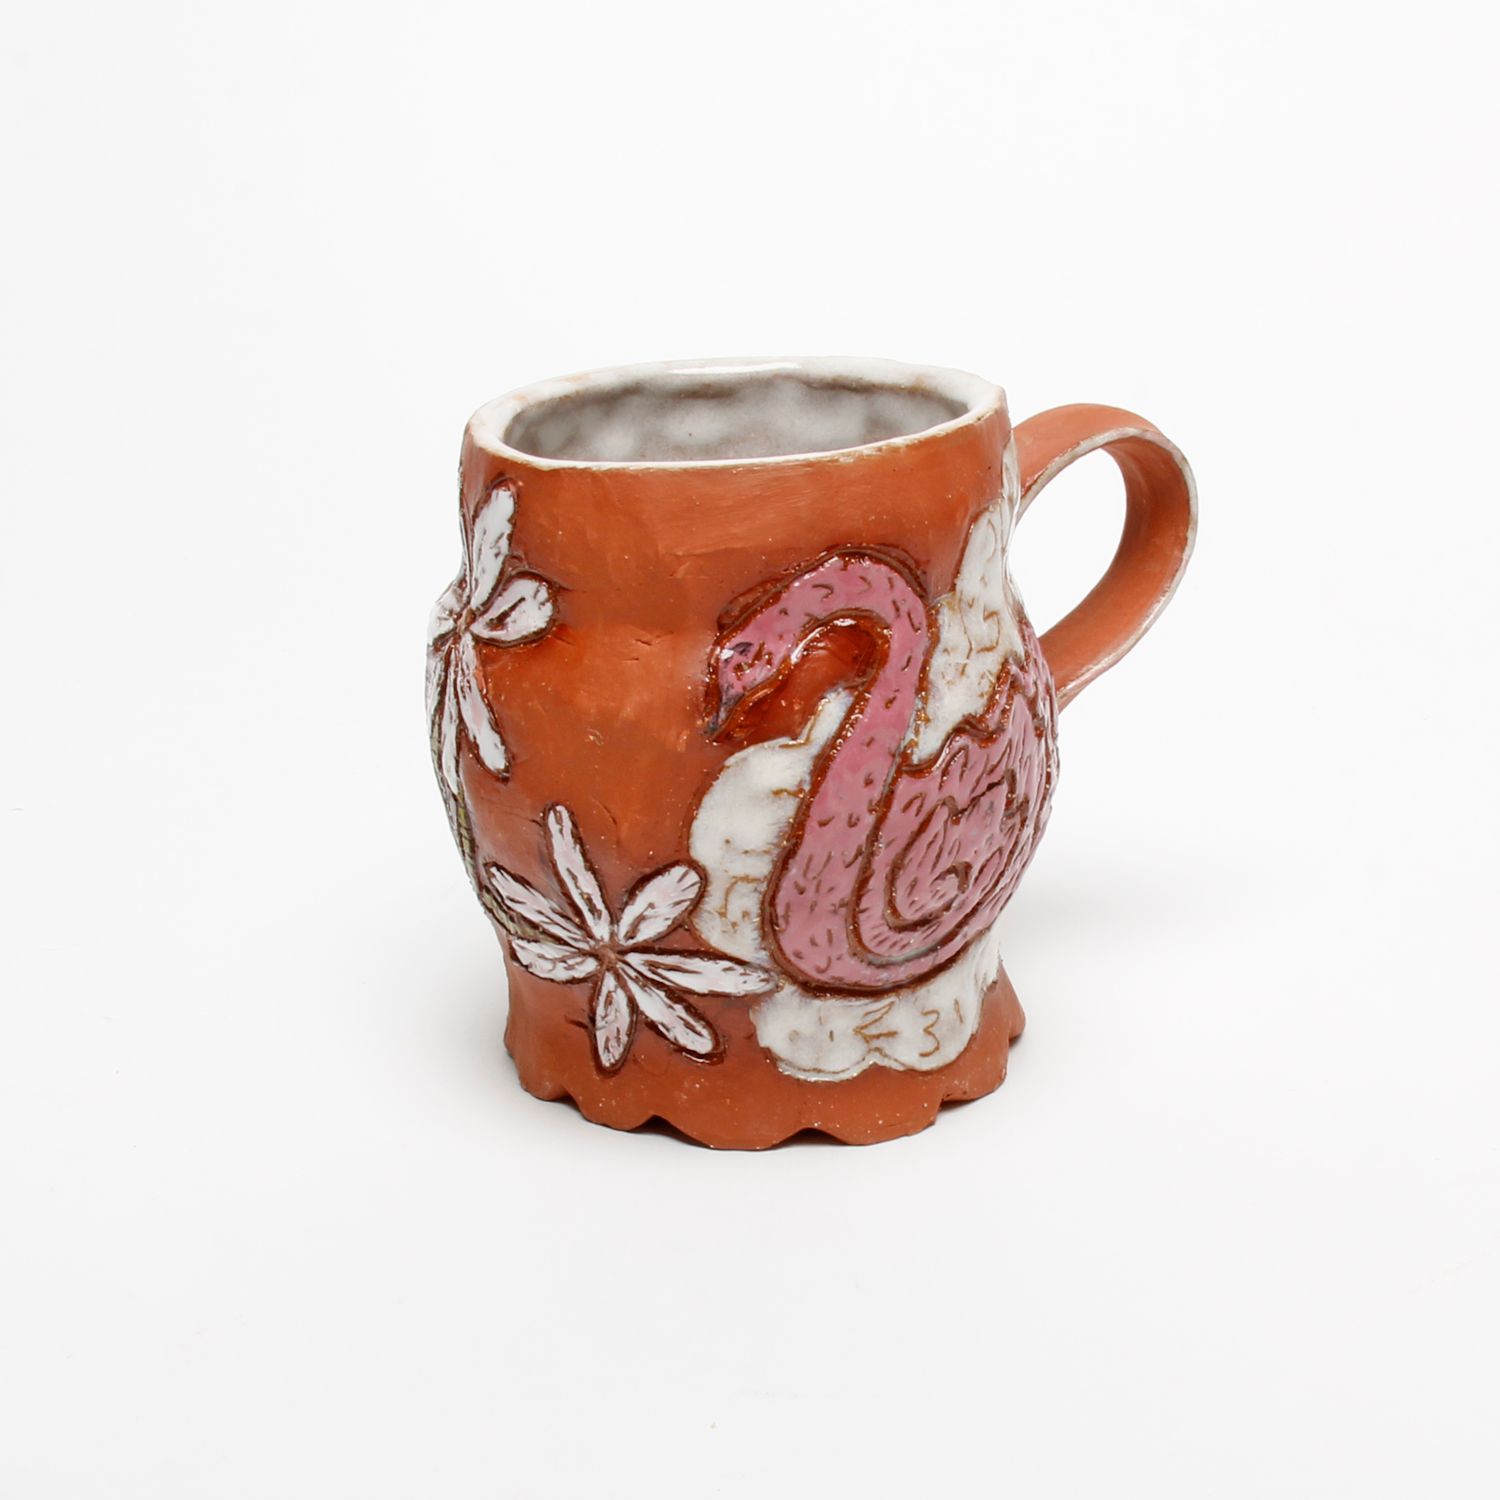 Zoë Pinnell: Tall Mug – Assorted Motifs Product Image 1 of 6